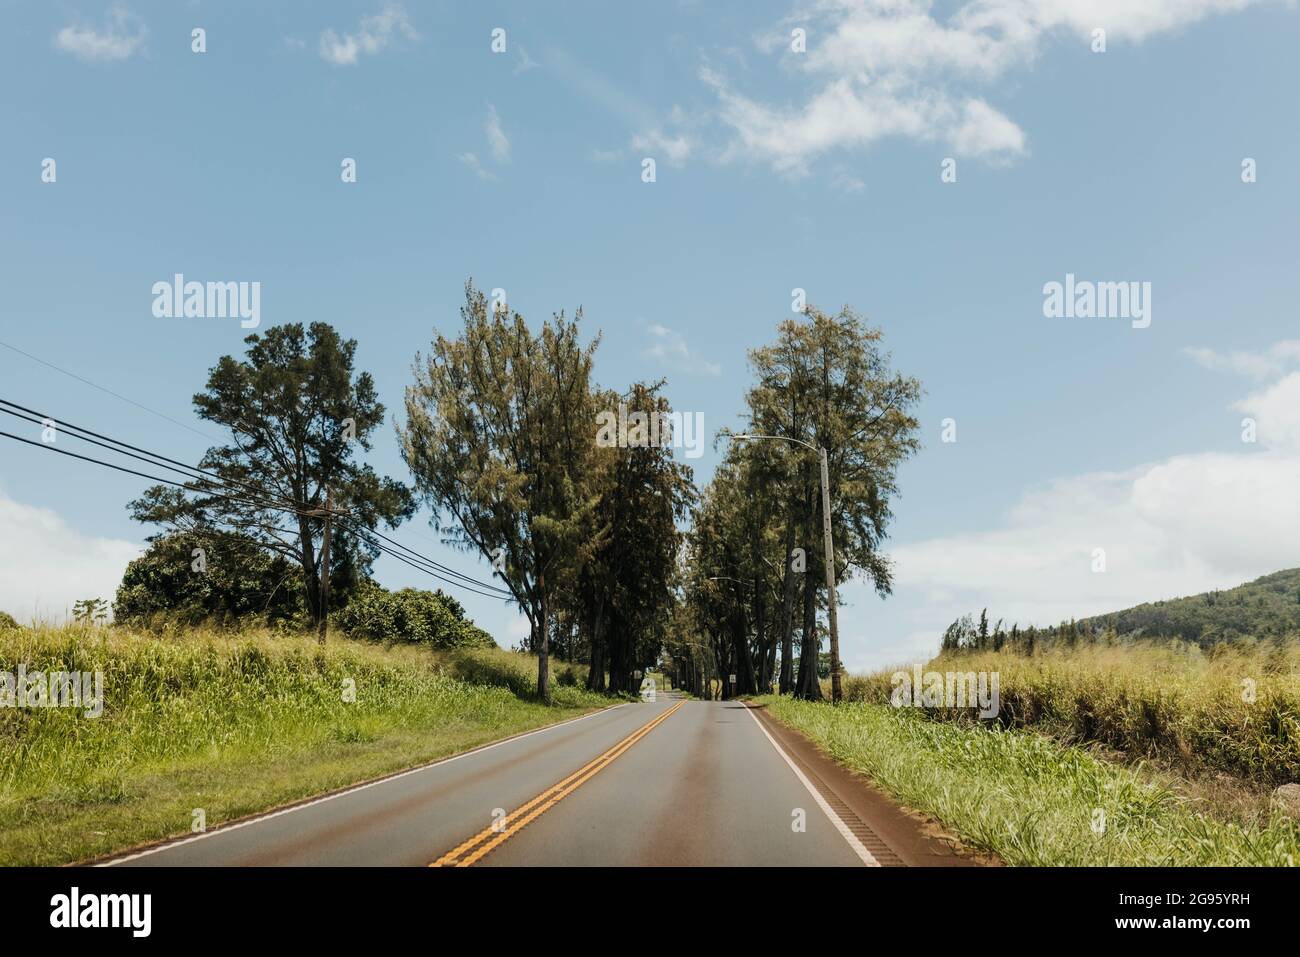 Country road lined with trees and tall grasses on a sunny day on Oahu Stock Photo